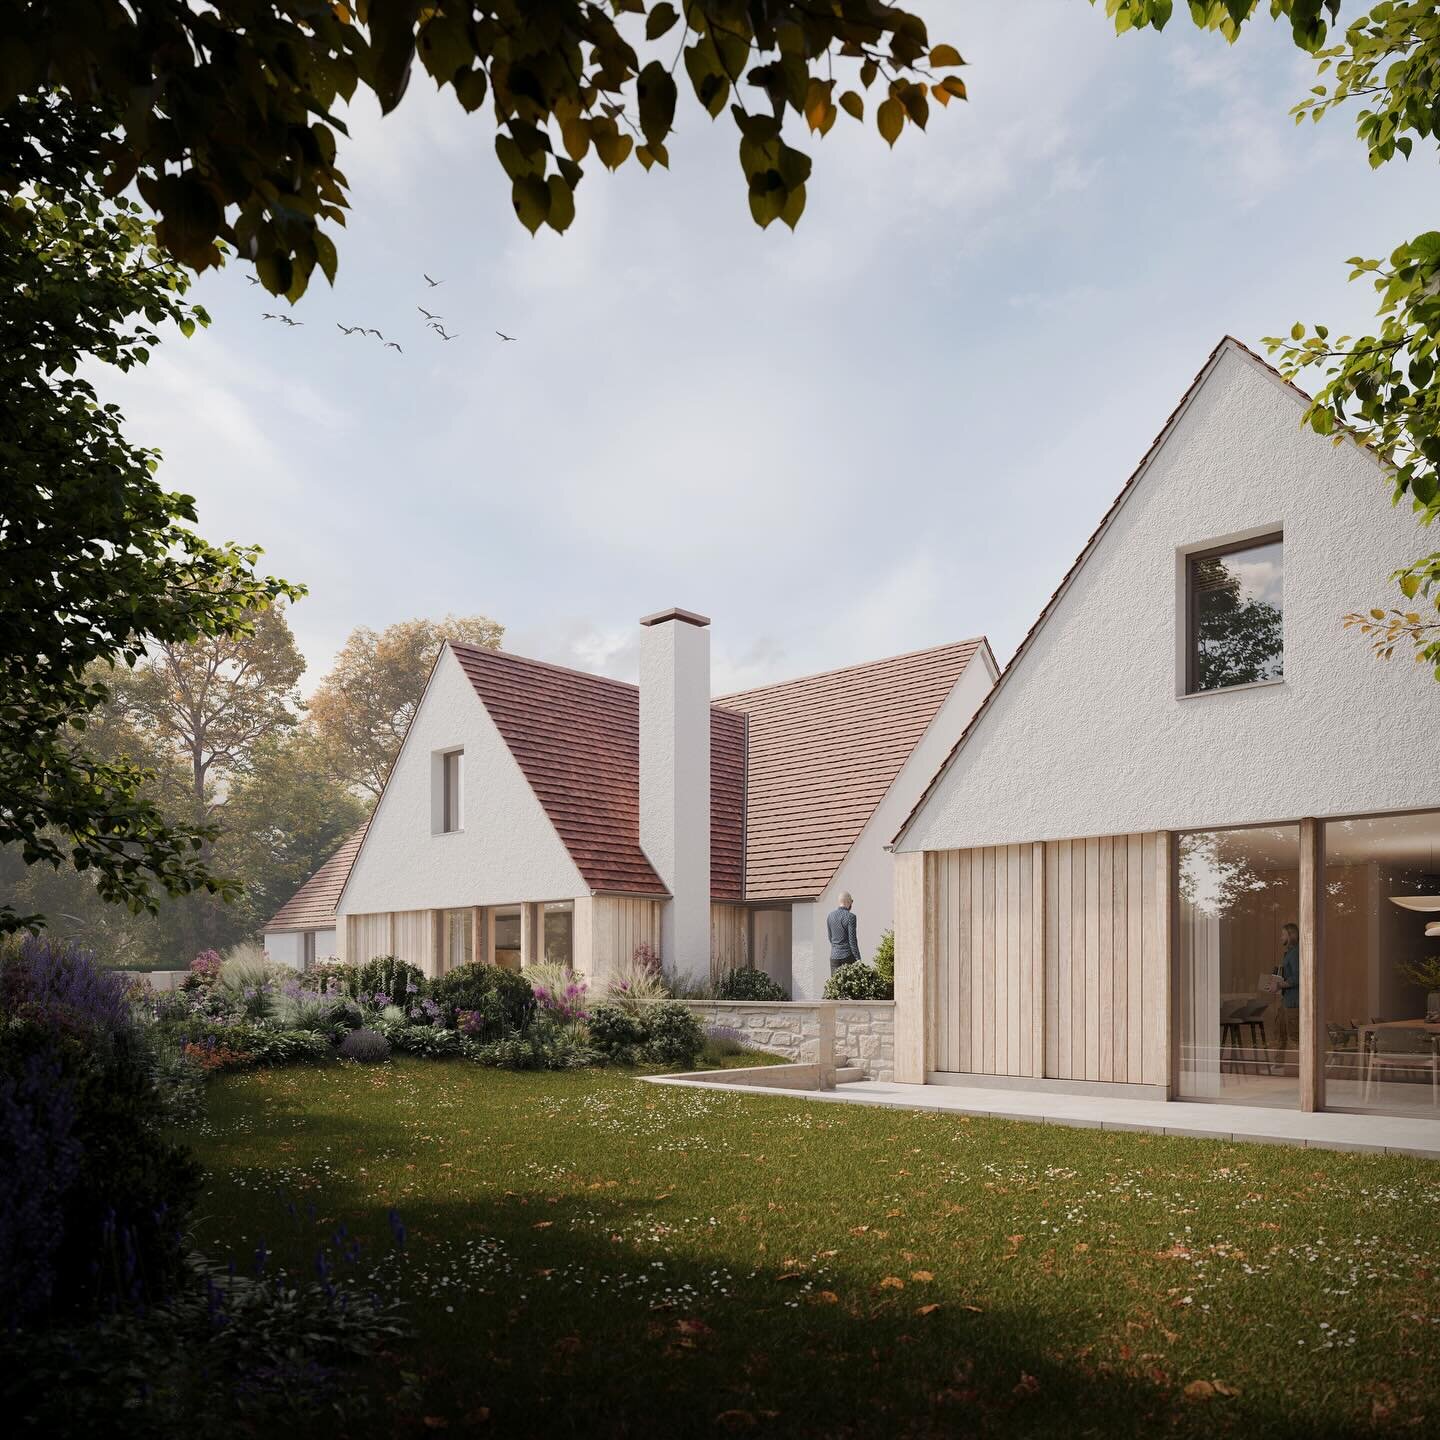 We&rsquo;ve recently submitted a planning application for these beauties - 4 new build &lsquo;Arts and Crafts&rsquo; inspired homes in tricky Conservation Area

.
Epic visuals from the talented @andydchard who&rsquo;s done a  stellar job of bringing 